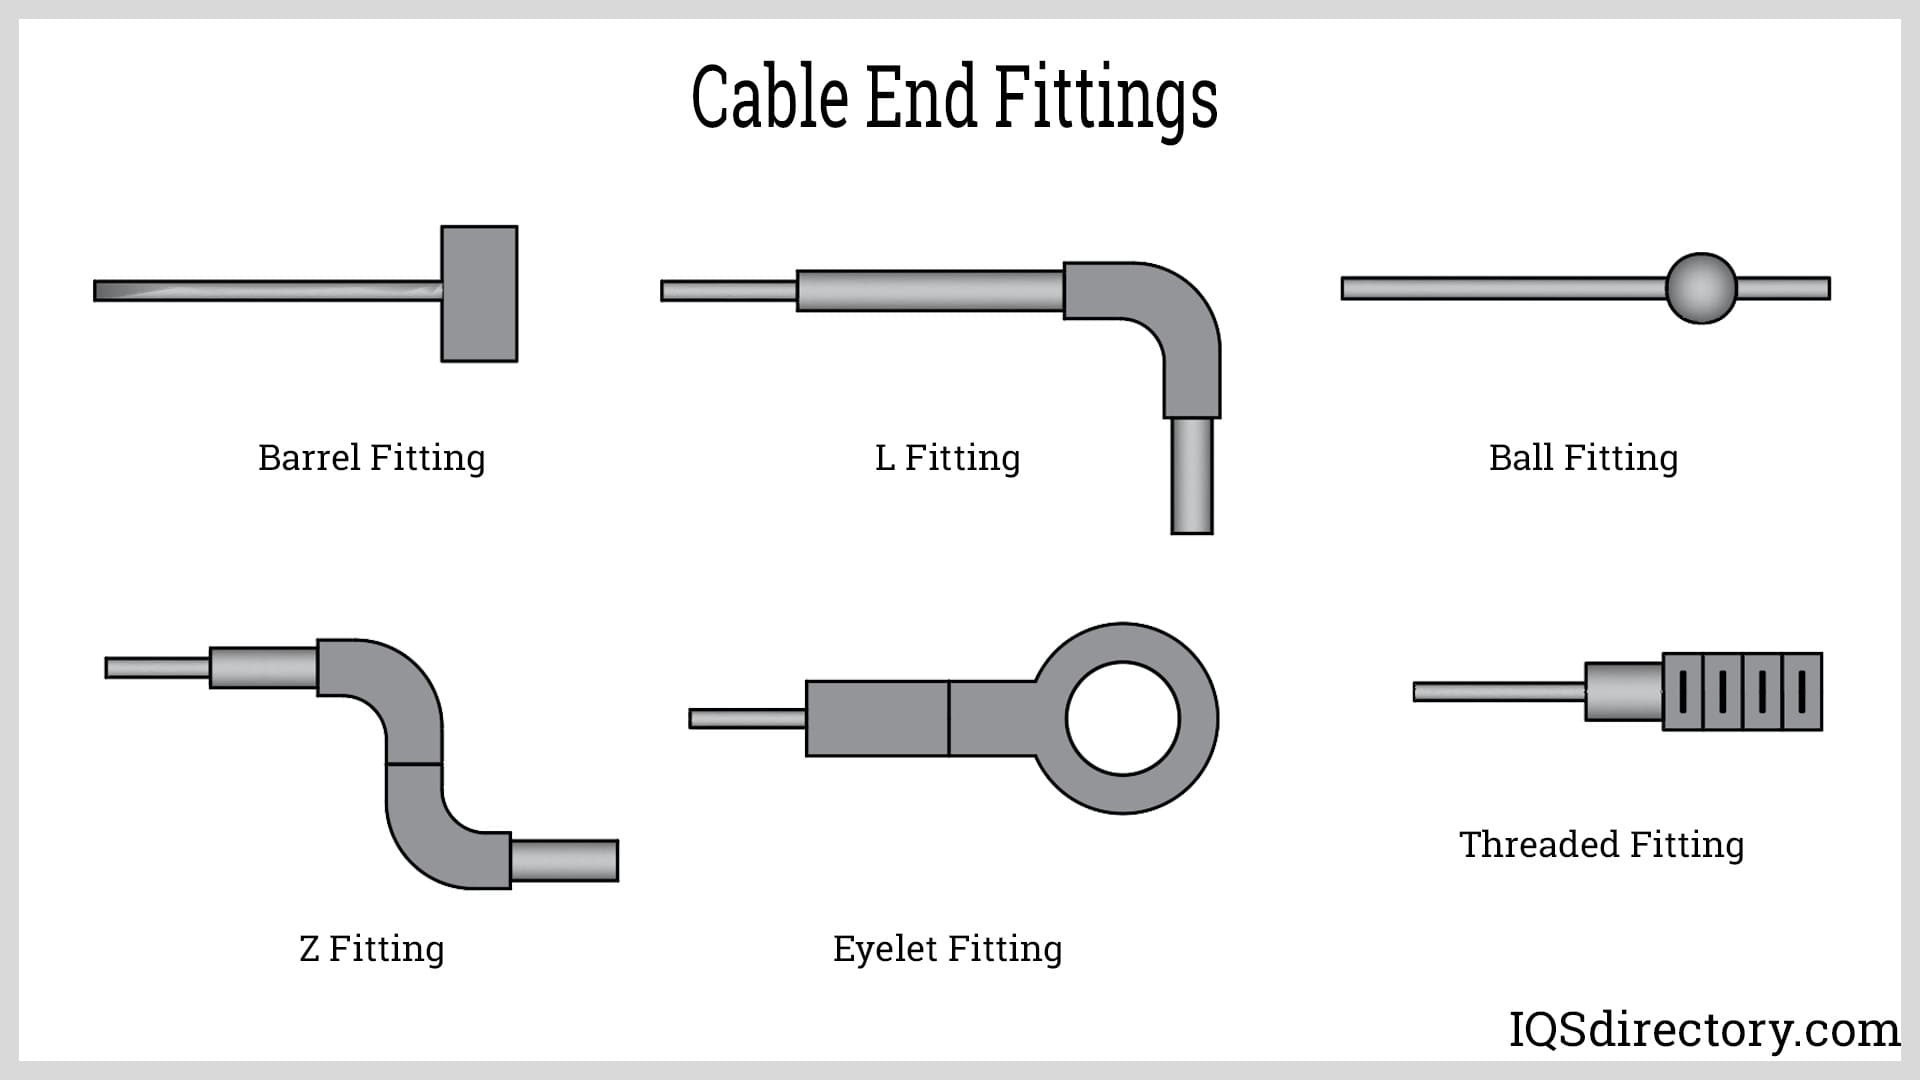 Cable End Fittings